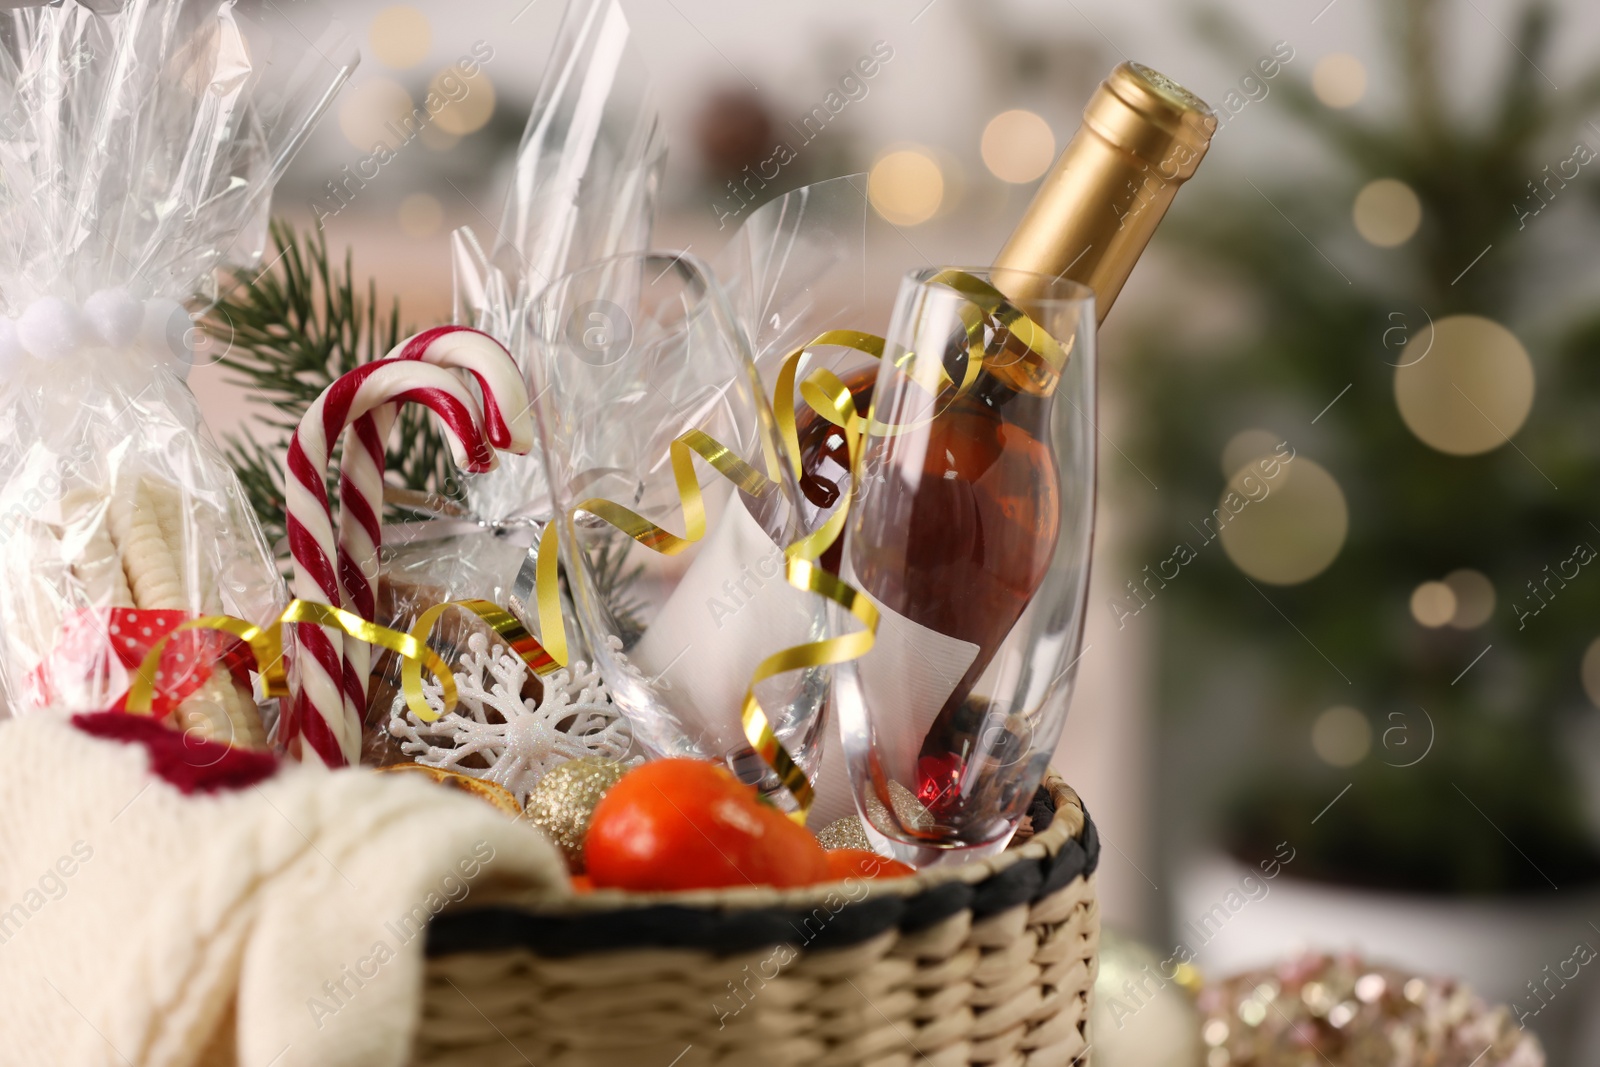 Photo of Wicker basket with Christmas gift set on blurred background, closeup